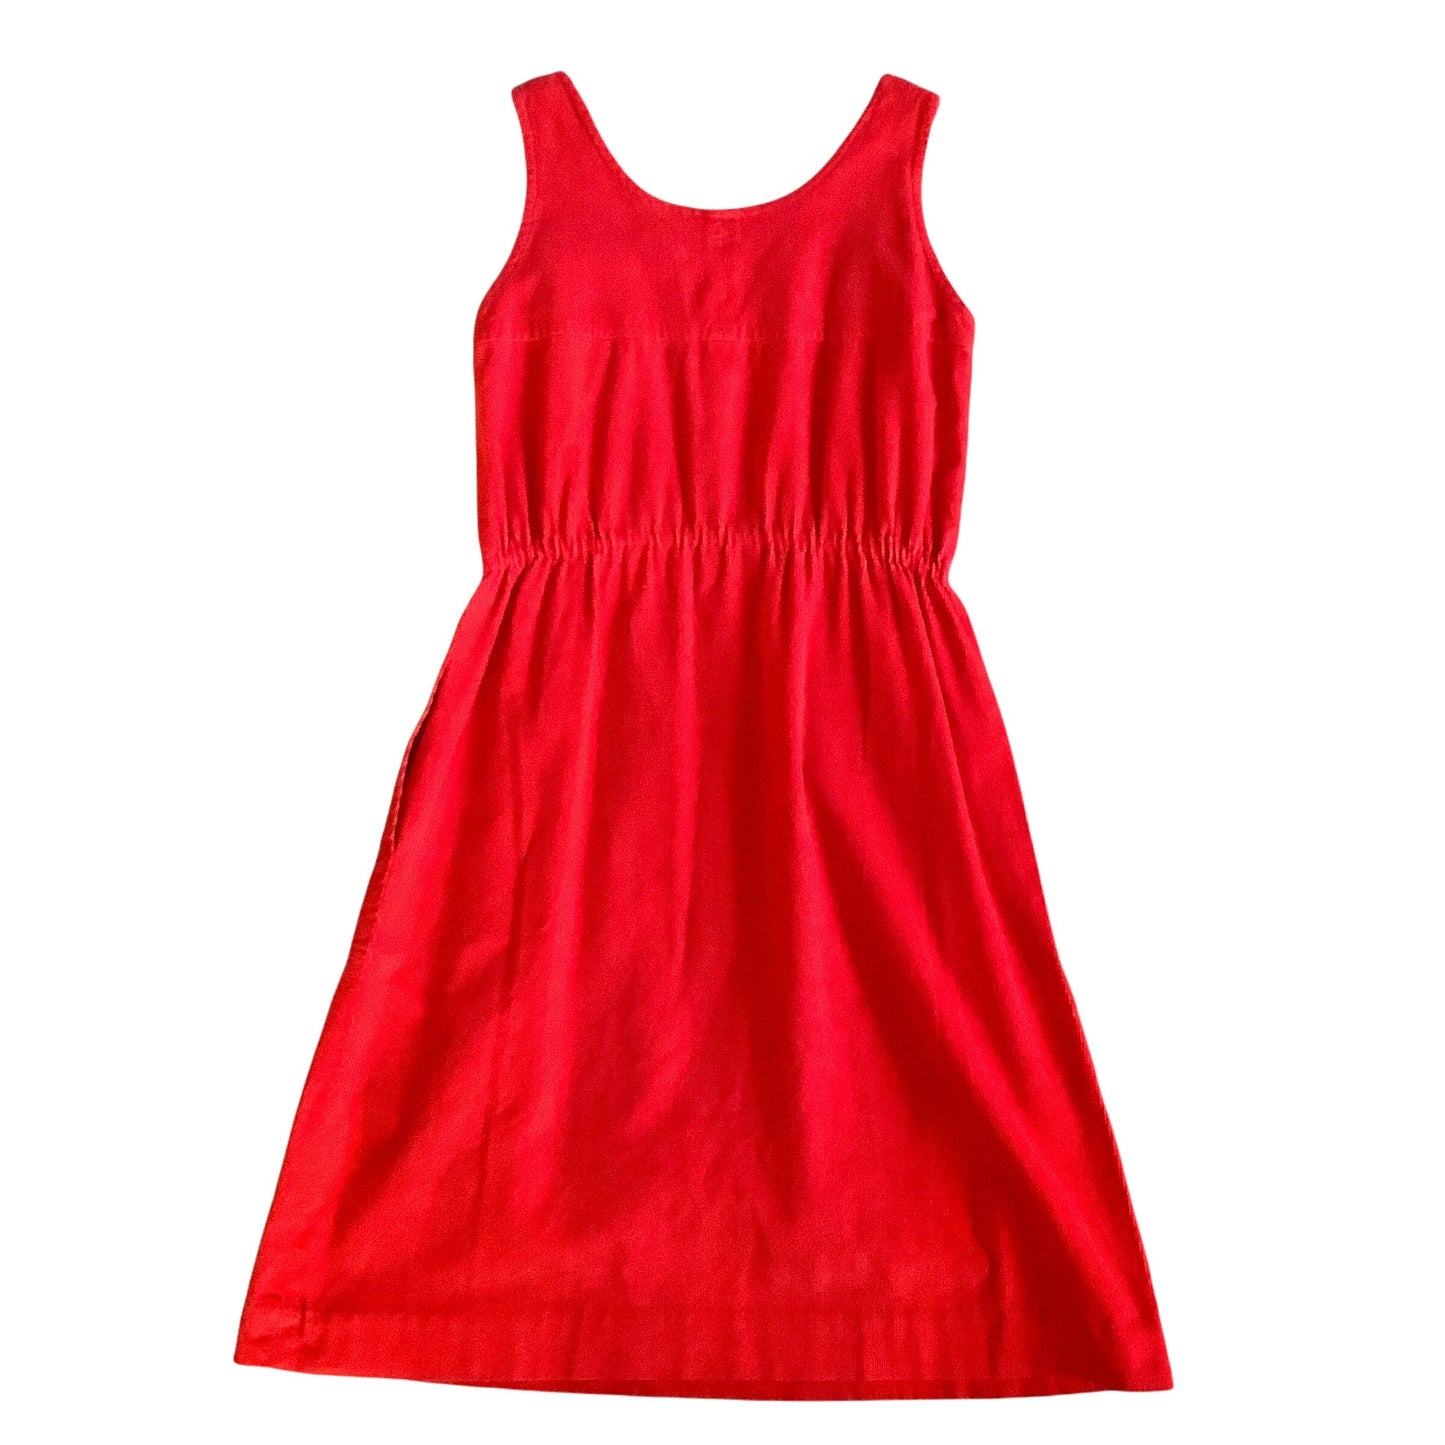 Vintage 1970's Red Cord Dress / 10-12Yrs